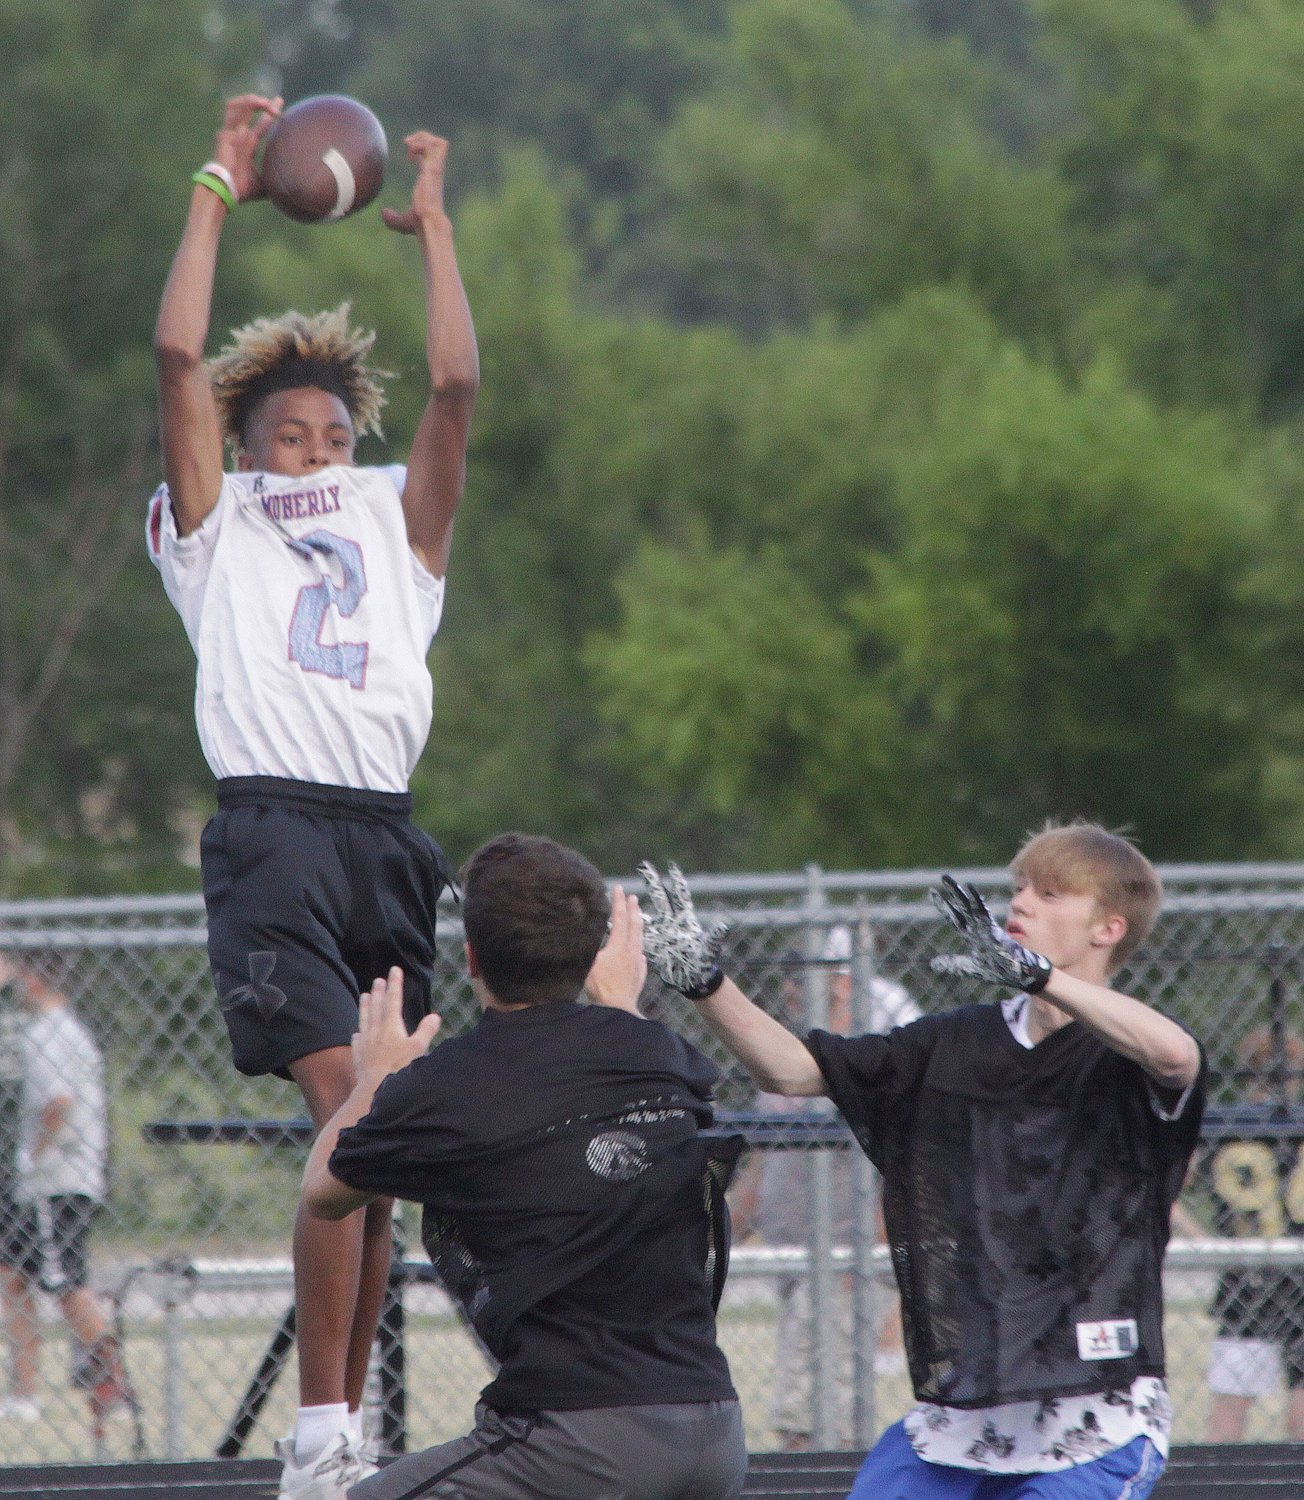 Demarcus Gilson, who will be a Moberly High School senior this upcoming school year, leaps high to grab this catch Wednesday, June 16 during a 7v7 football scrimmage held at Moberly. Such sessions are scheduled to be hosted at Moberly every Wednesday evening starting around 6 p.m.